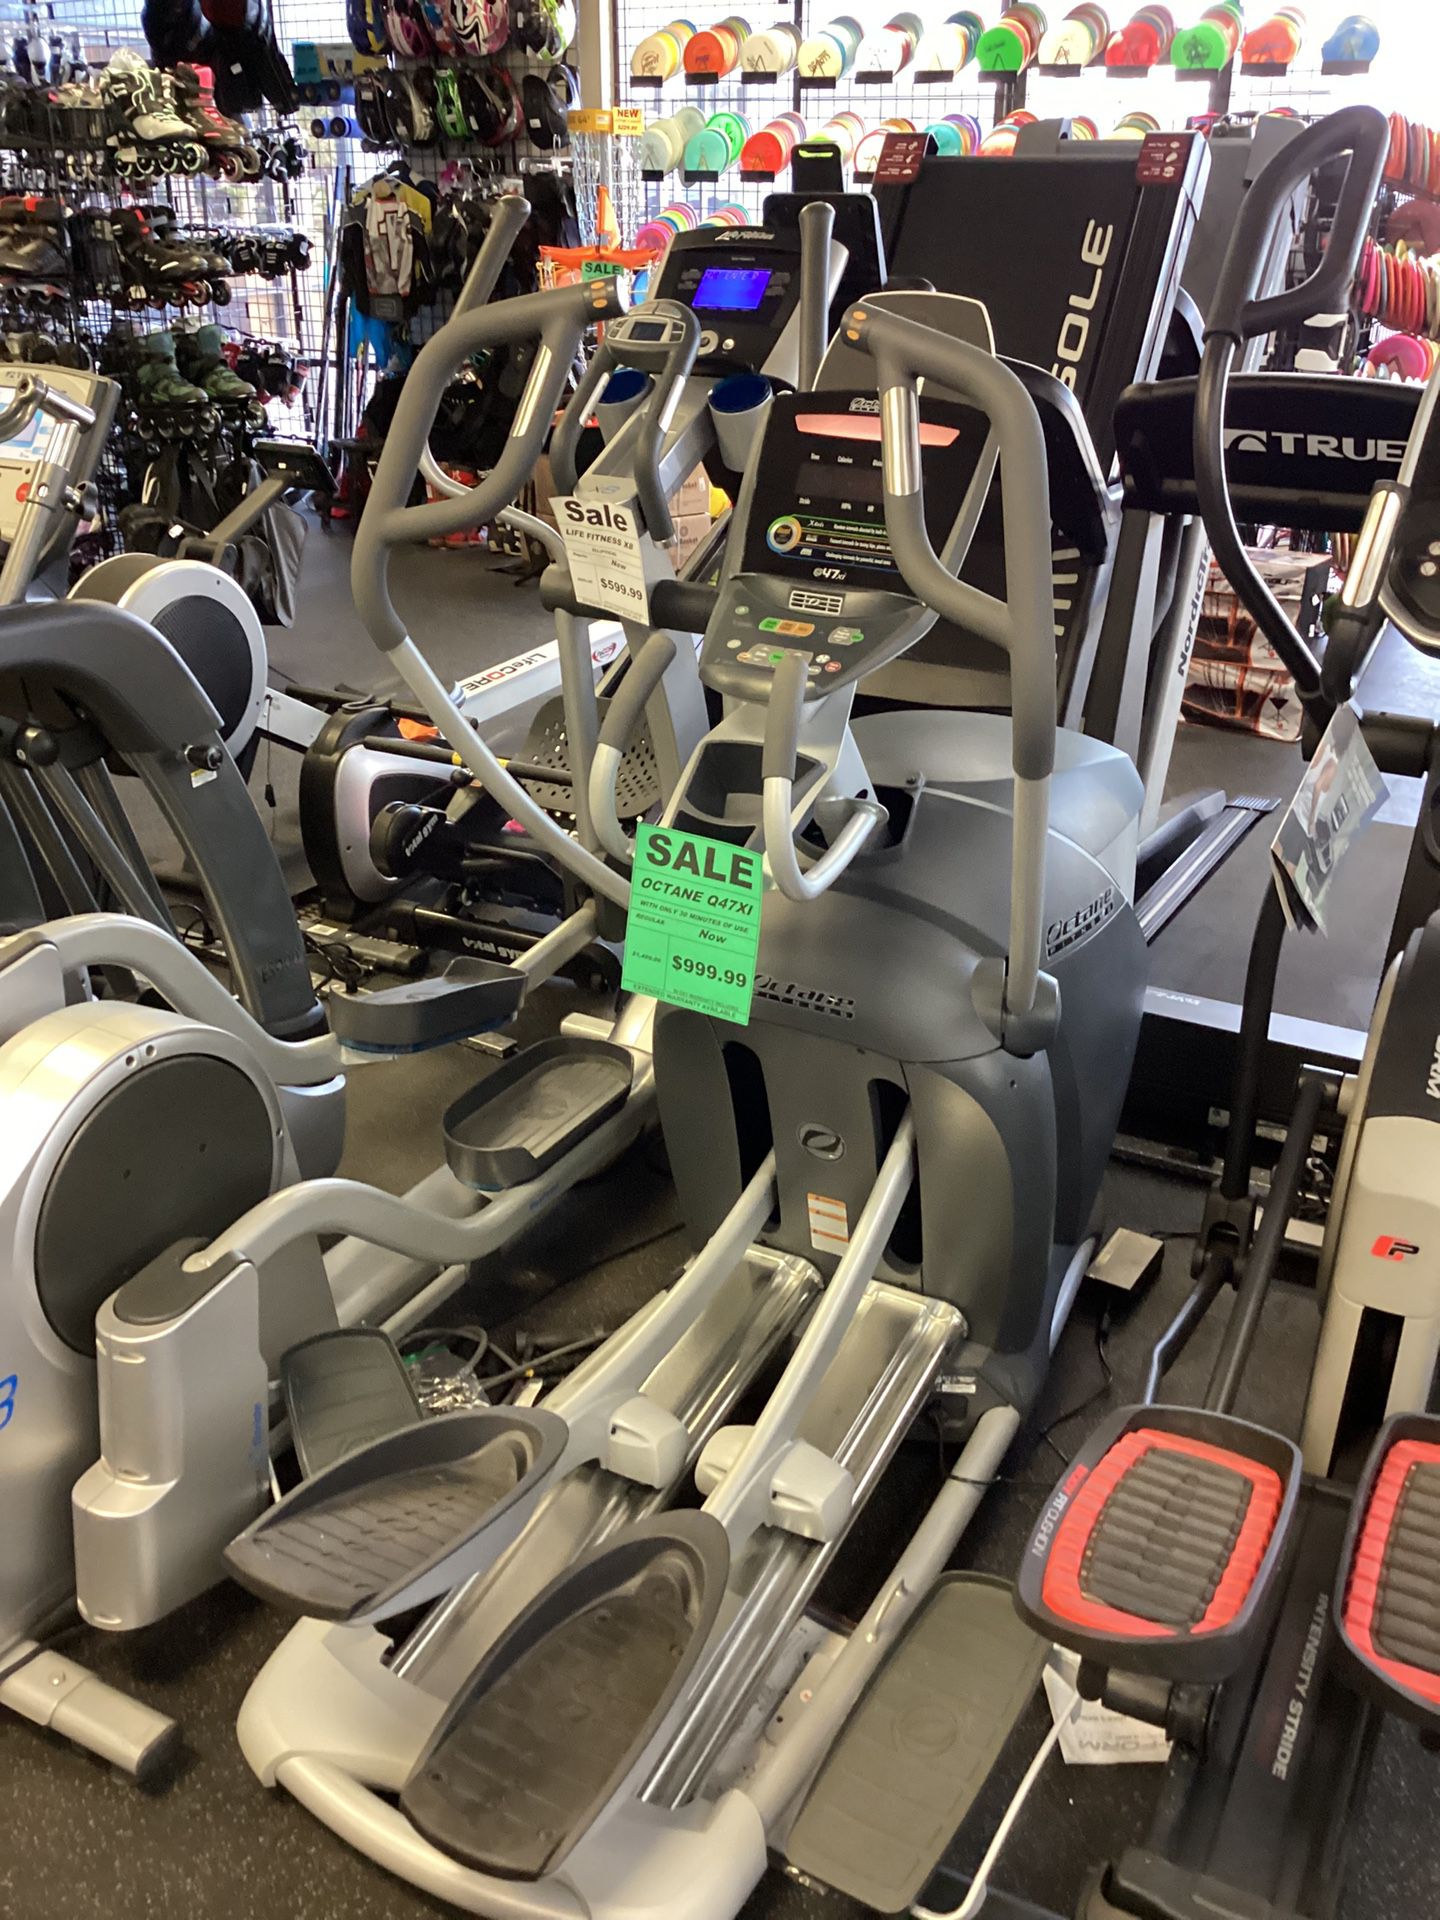 Octane Fitness Q47xi Elliptical Cross Trainer With Adjustable Stride Length Like New